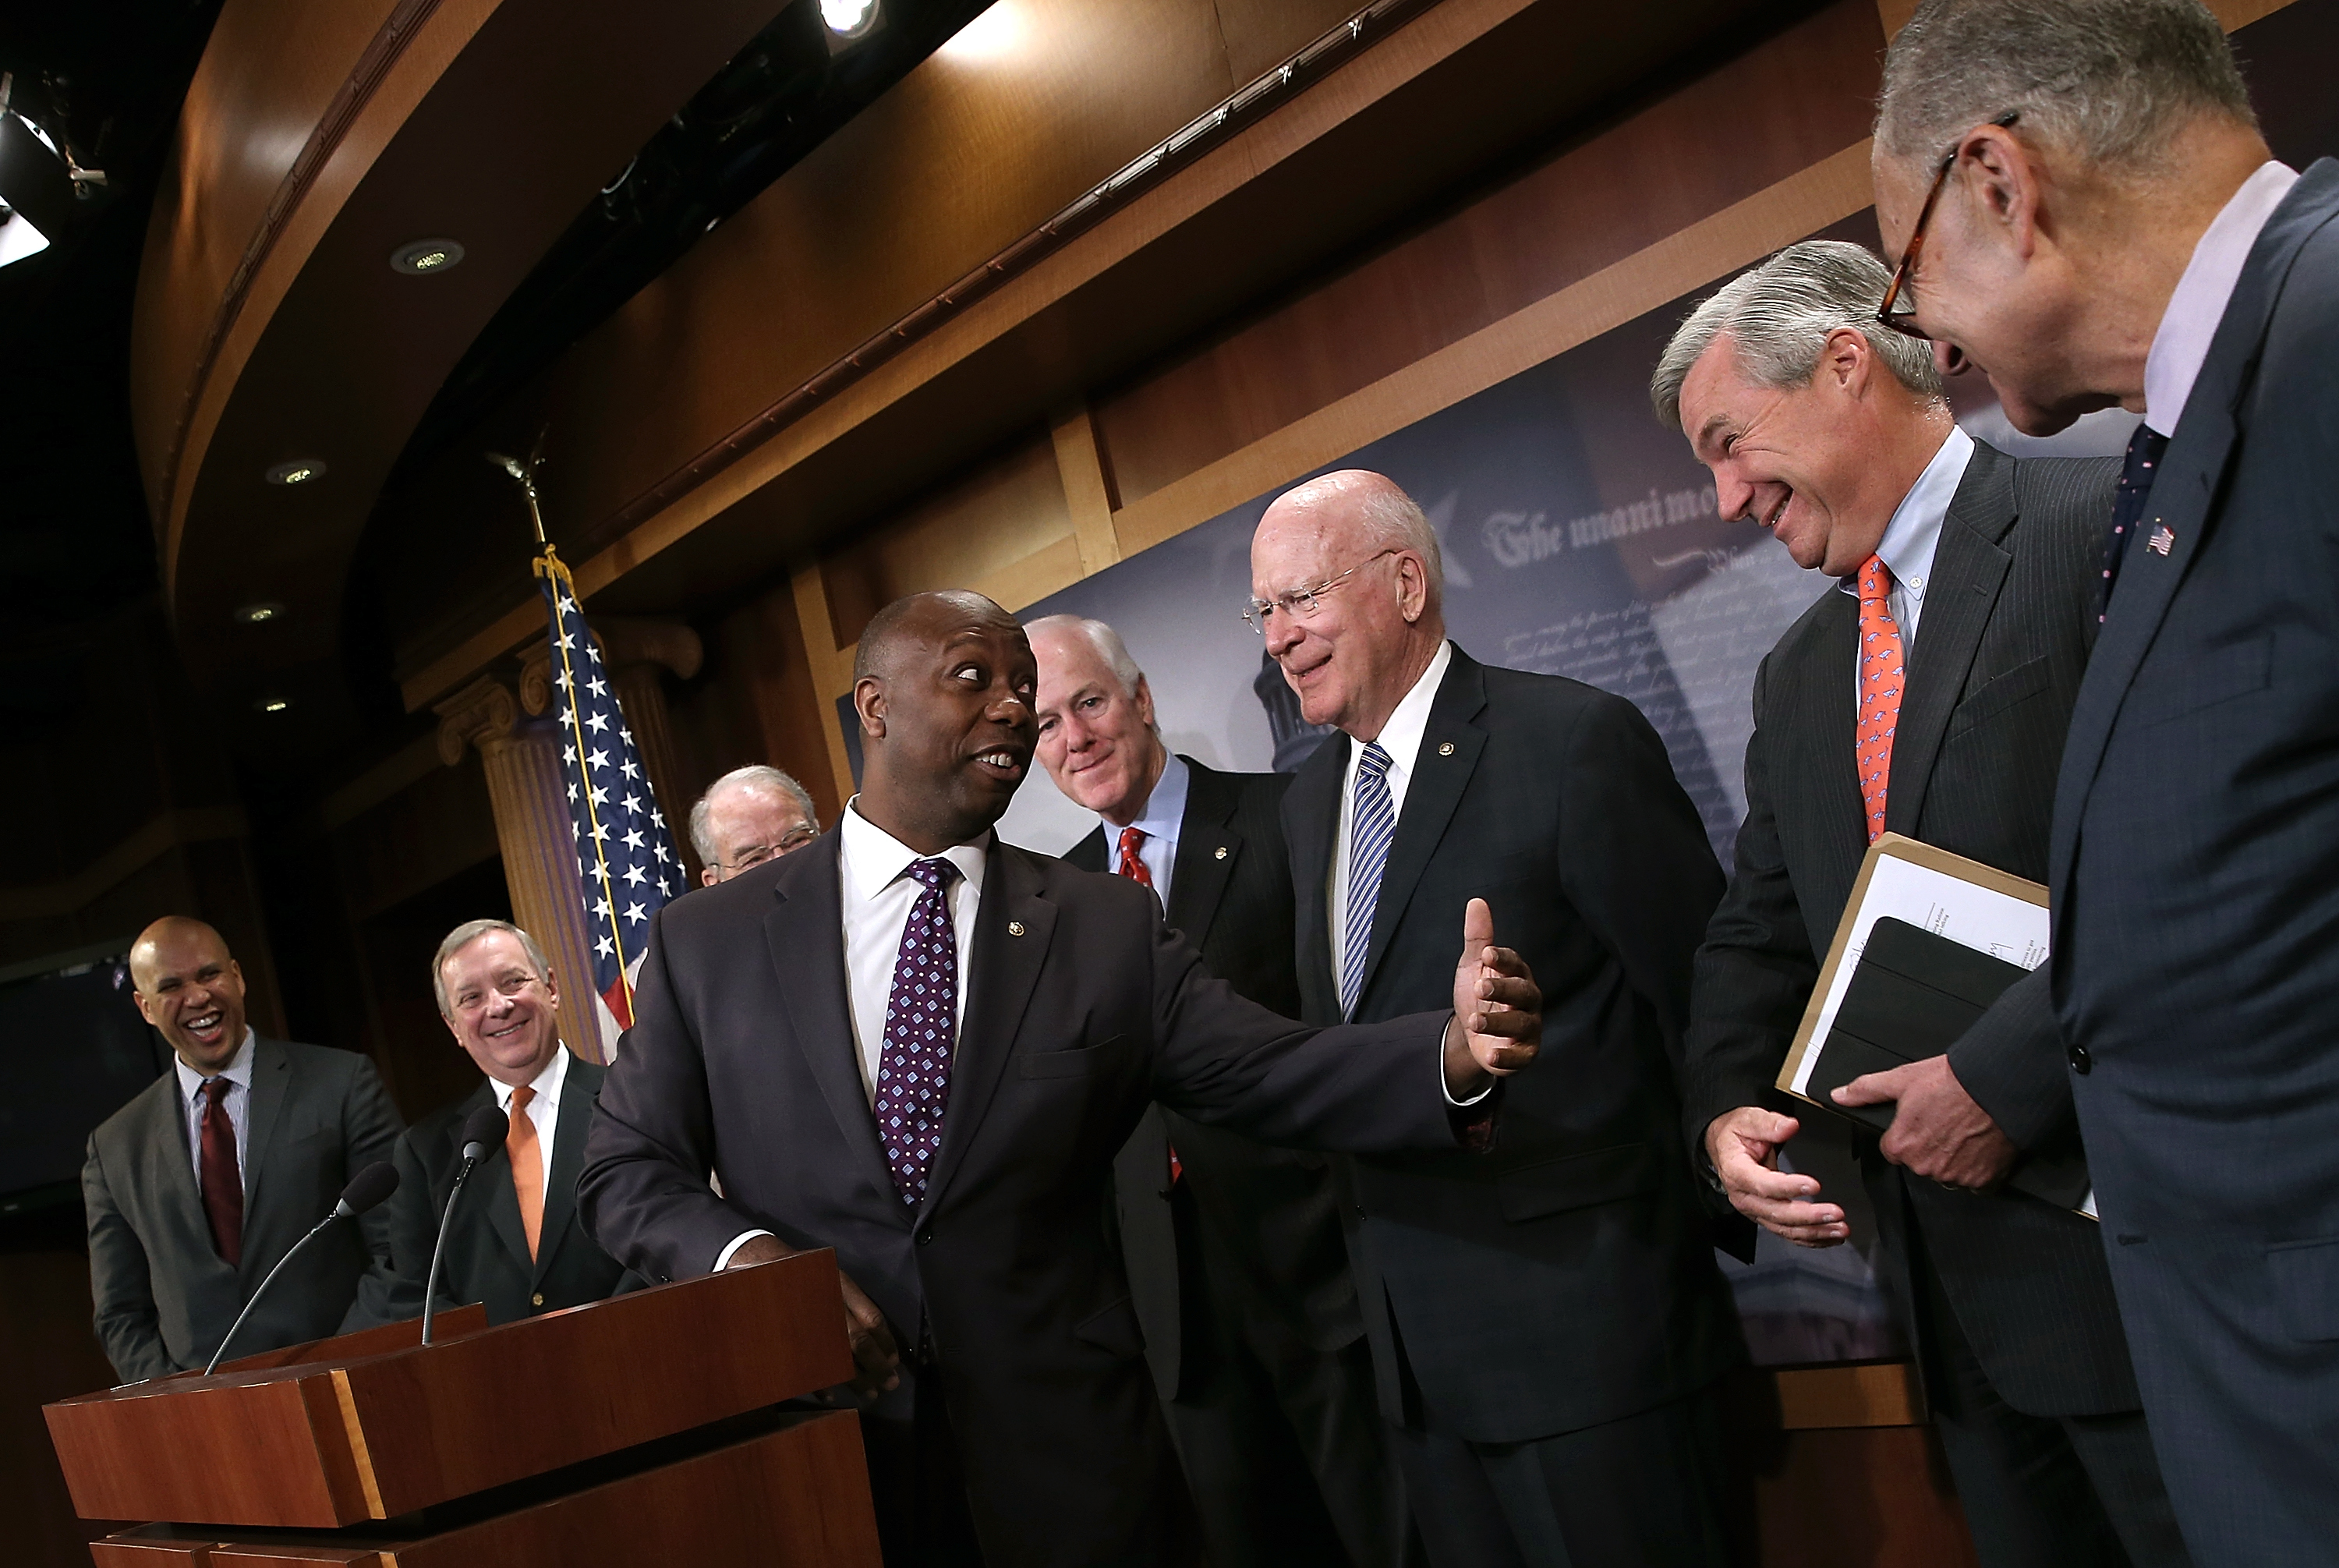 A bipartisan groups of senators have agreed to a prison reform package